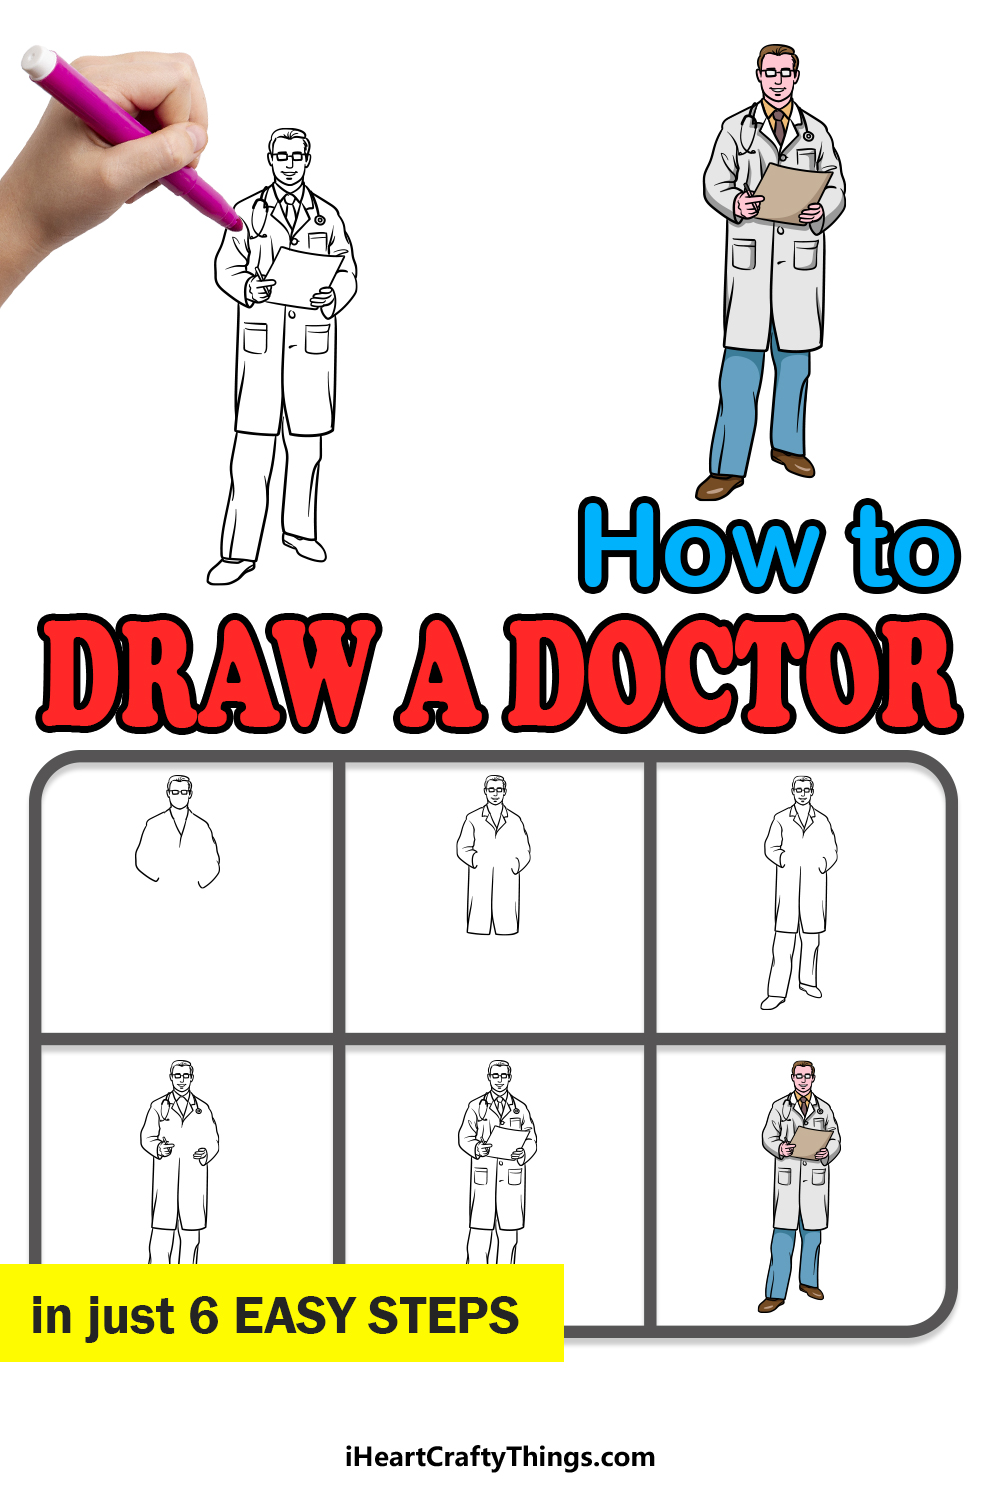 how to draw a doctor in 6 easy steps